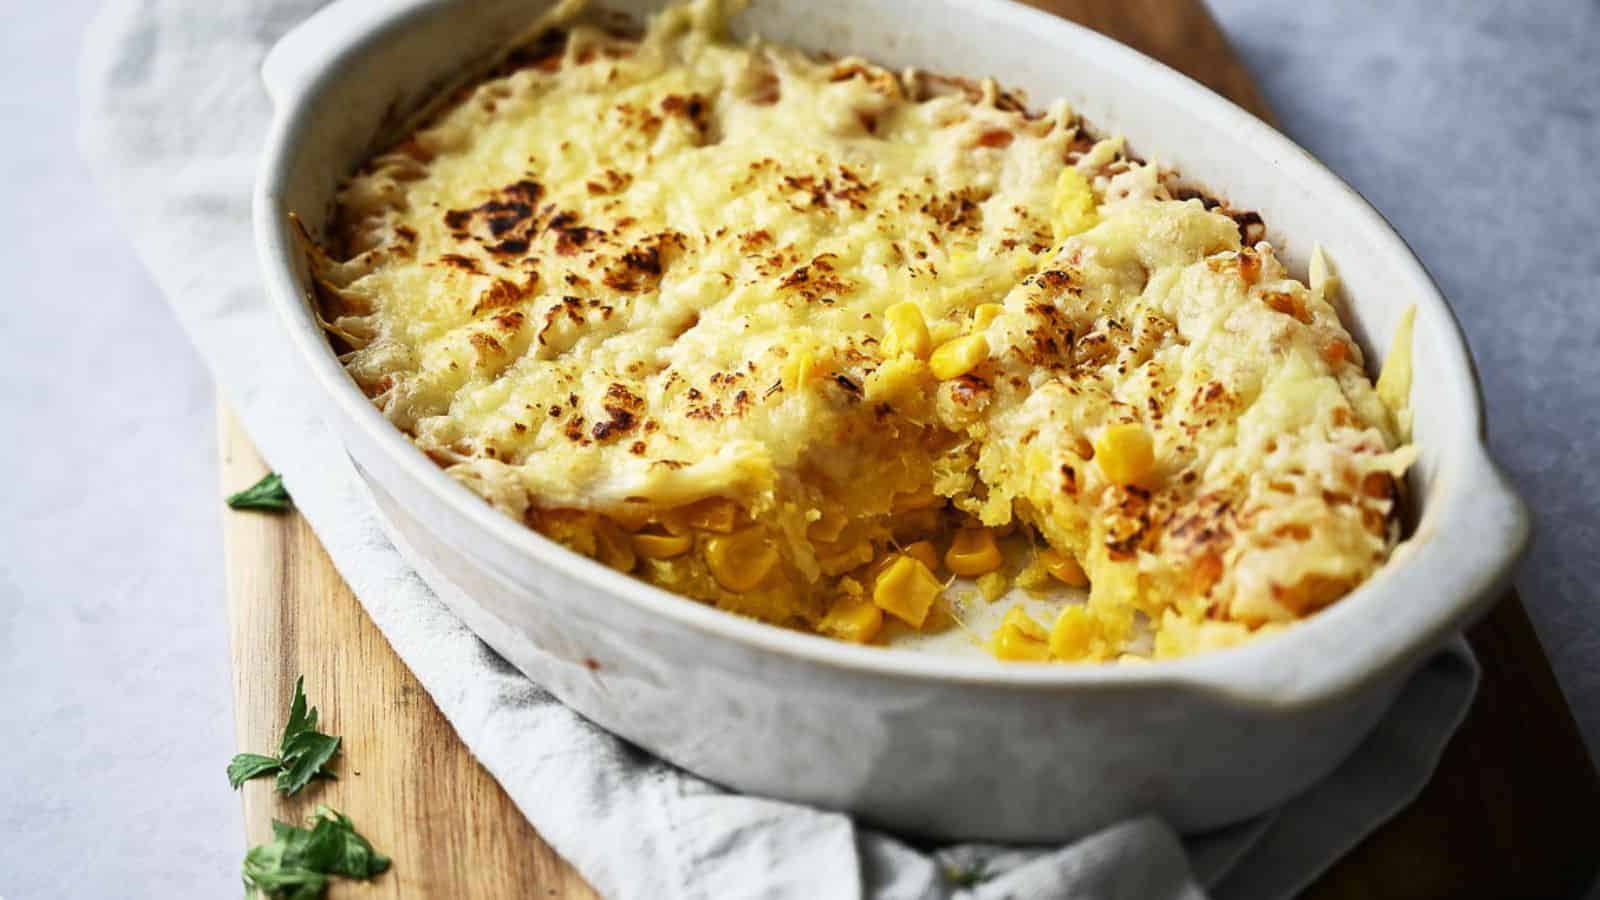 Dinner In A Dish! 13 No-Fuss Casserole Recipes For Stress-Free Meals ...